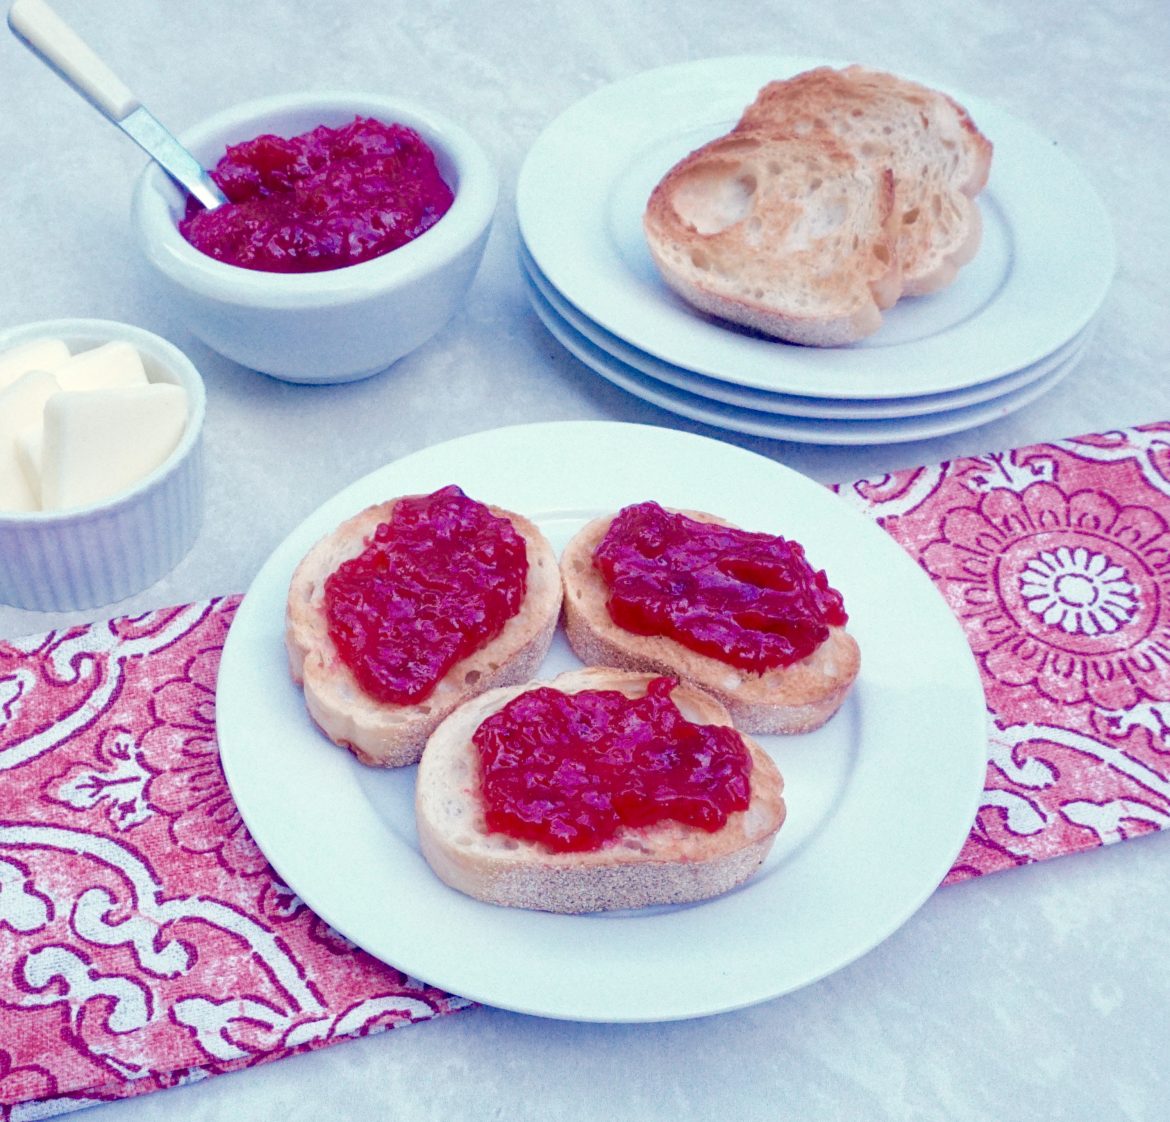 Plum Freezer Jam is a great way to preserve summer plums.